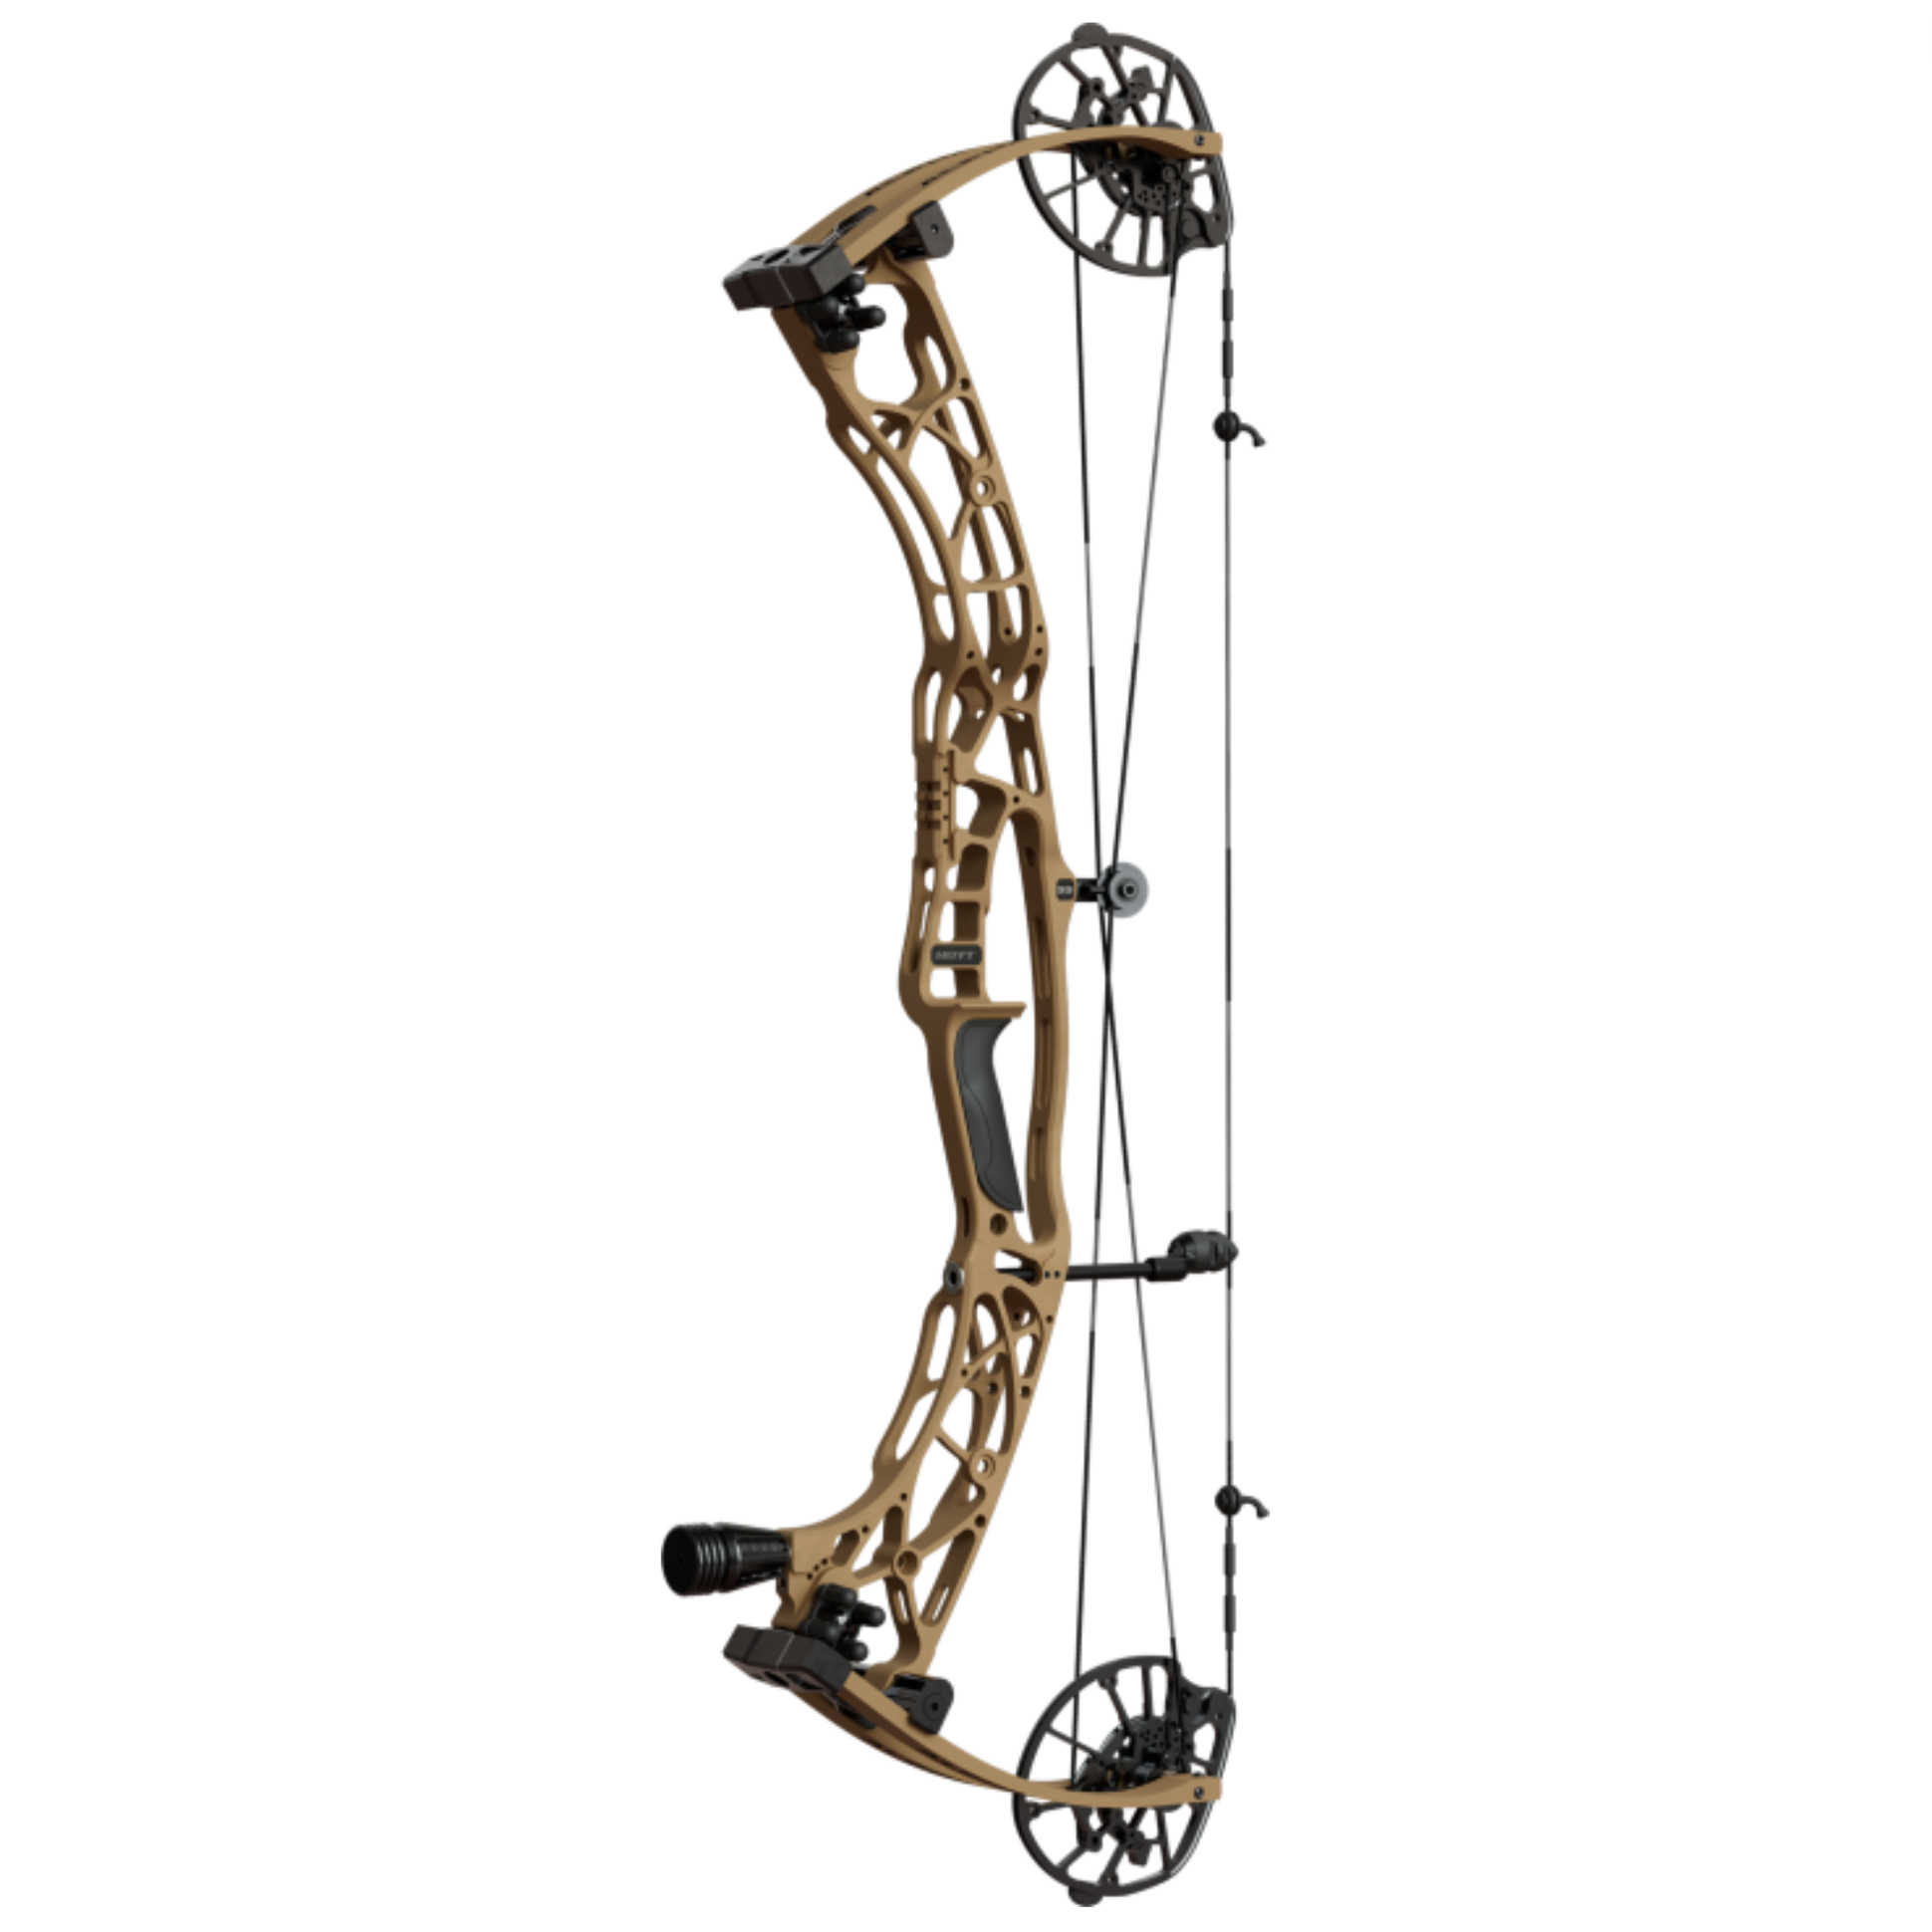 Hoyt Alpha X 33 Compound Hunting Bow